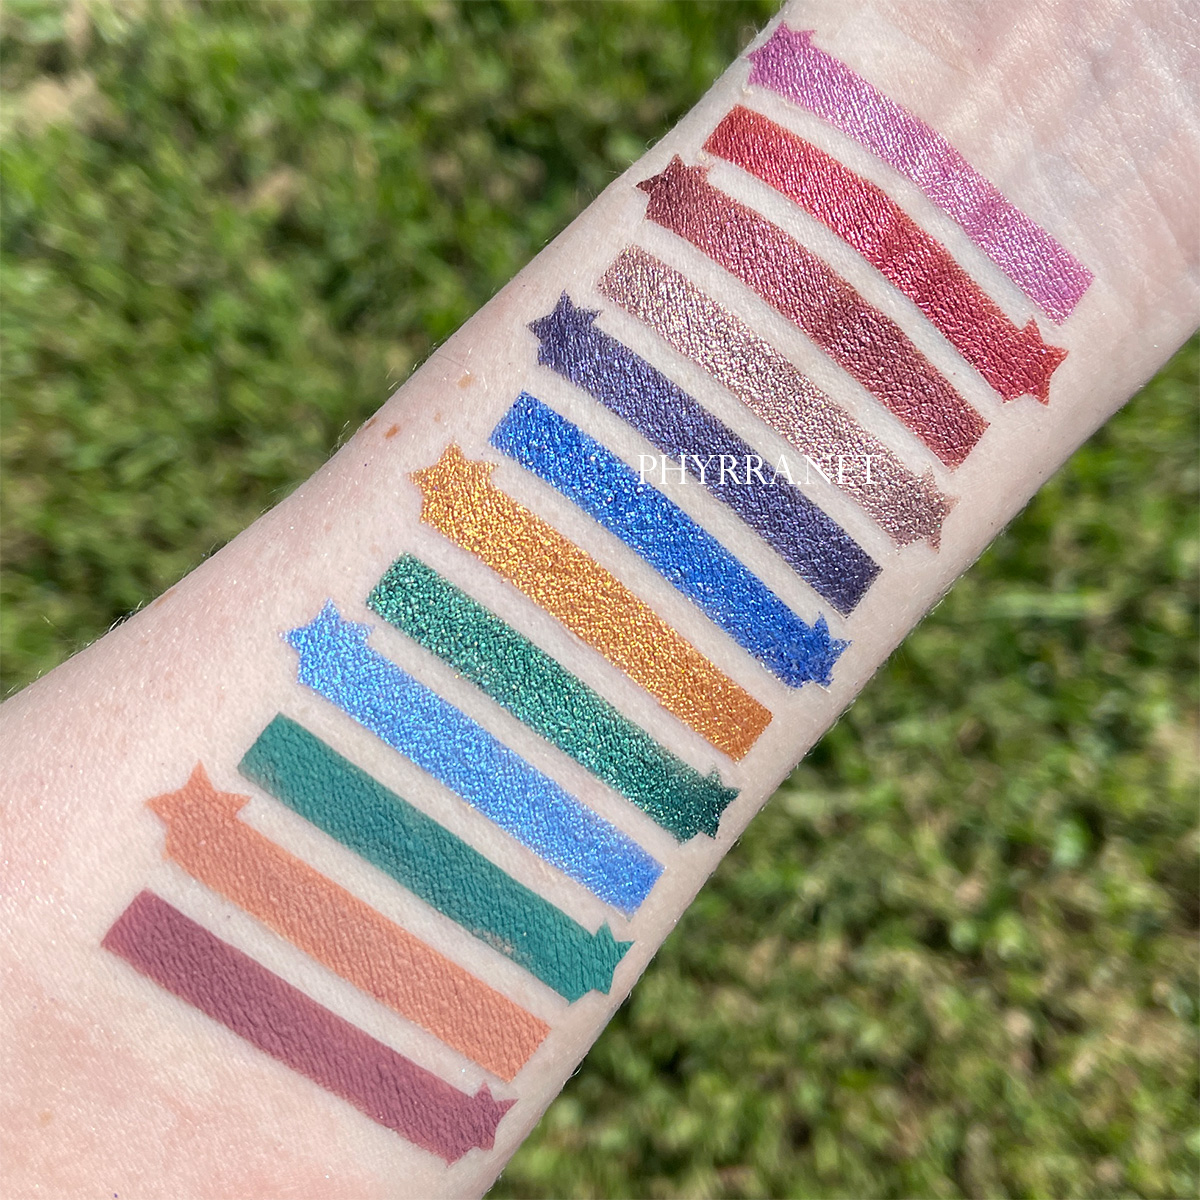 Syndey Grace Temptalia Radiant Reflection Swatches on Very Fair Skin